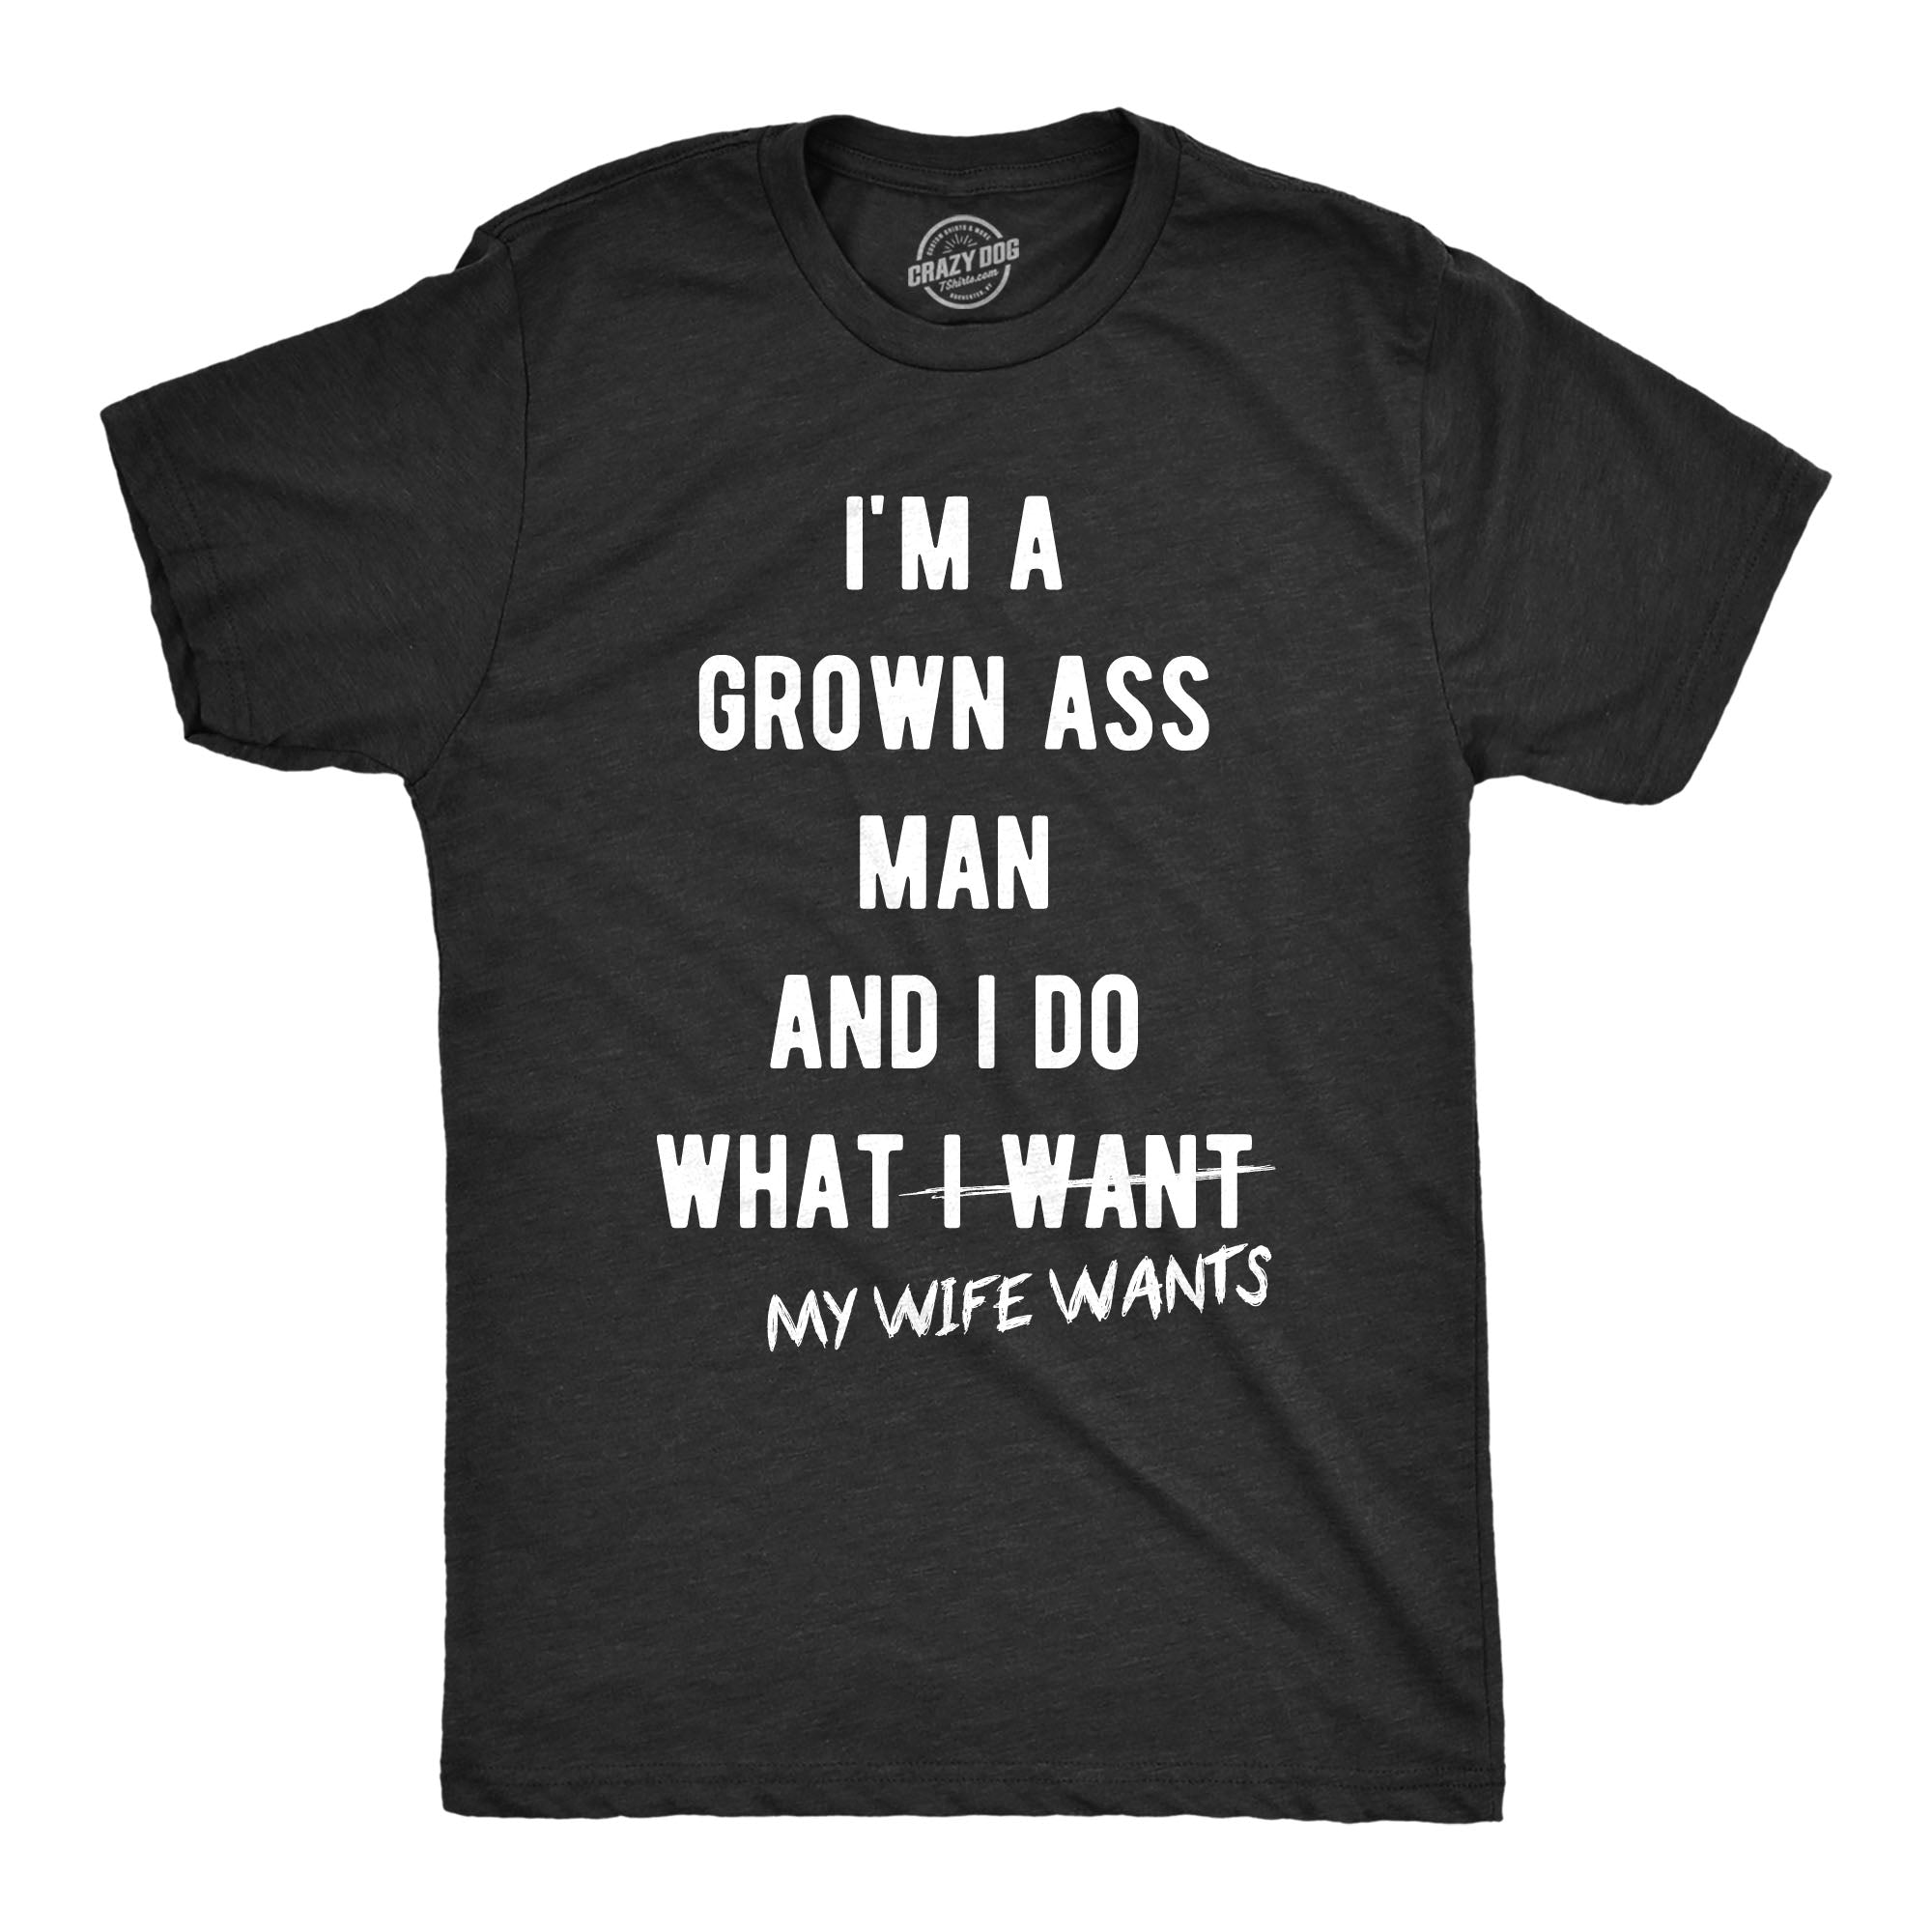 Funny Heather Black - Wife Wants I Do What My Wife Wants Mens T Shirt Nerdy Father's Day Tee